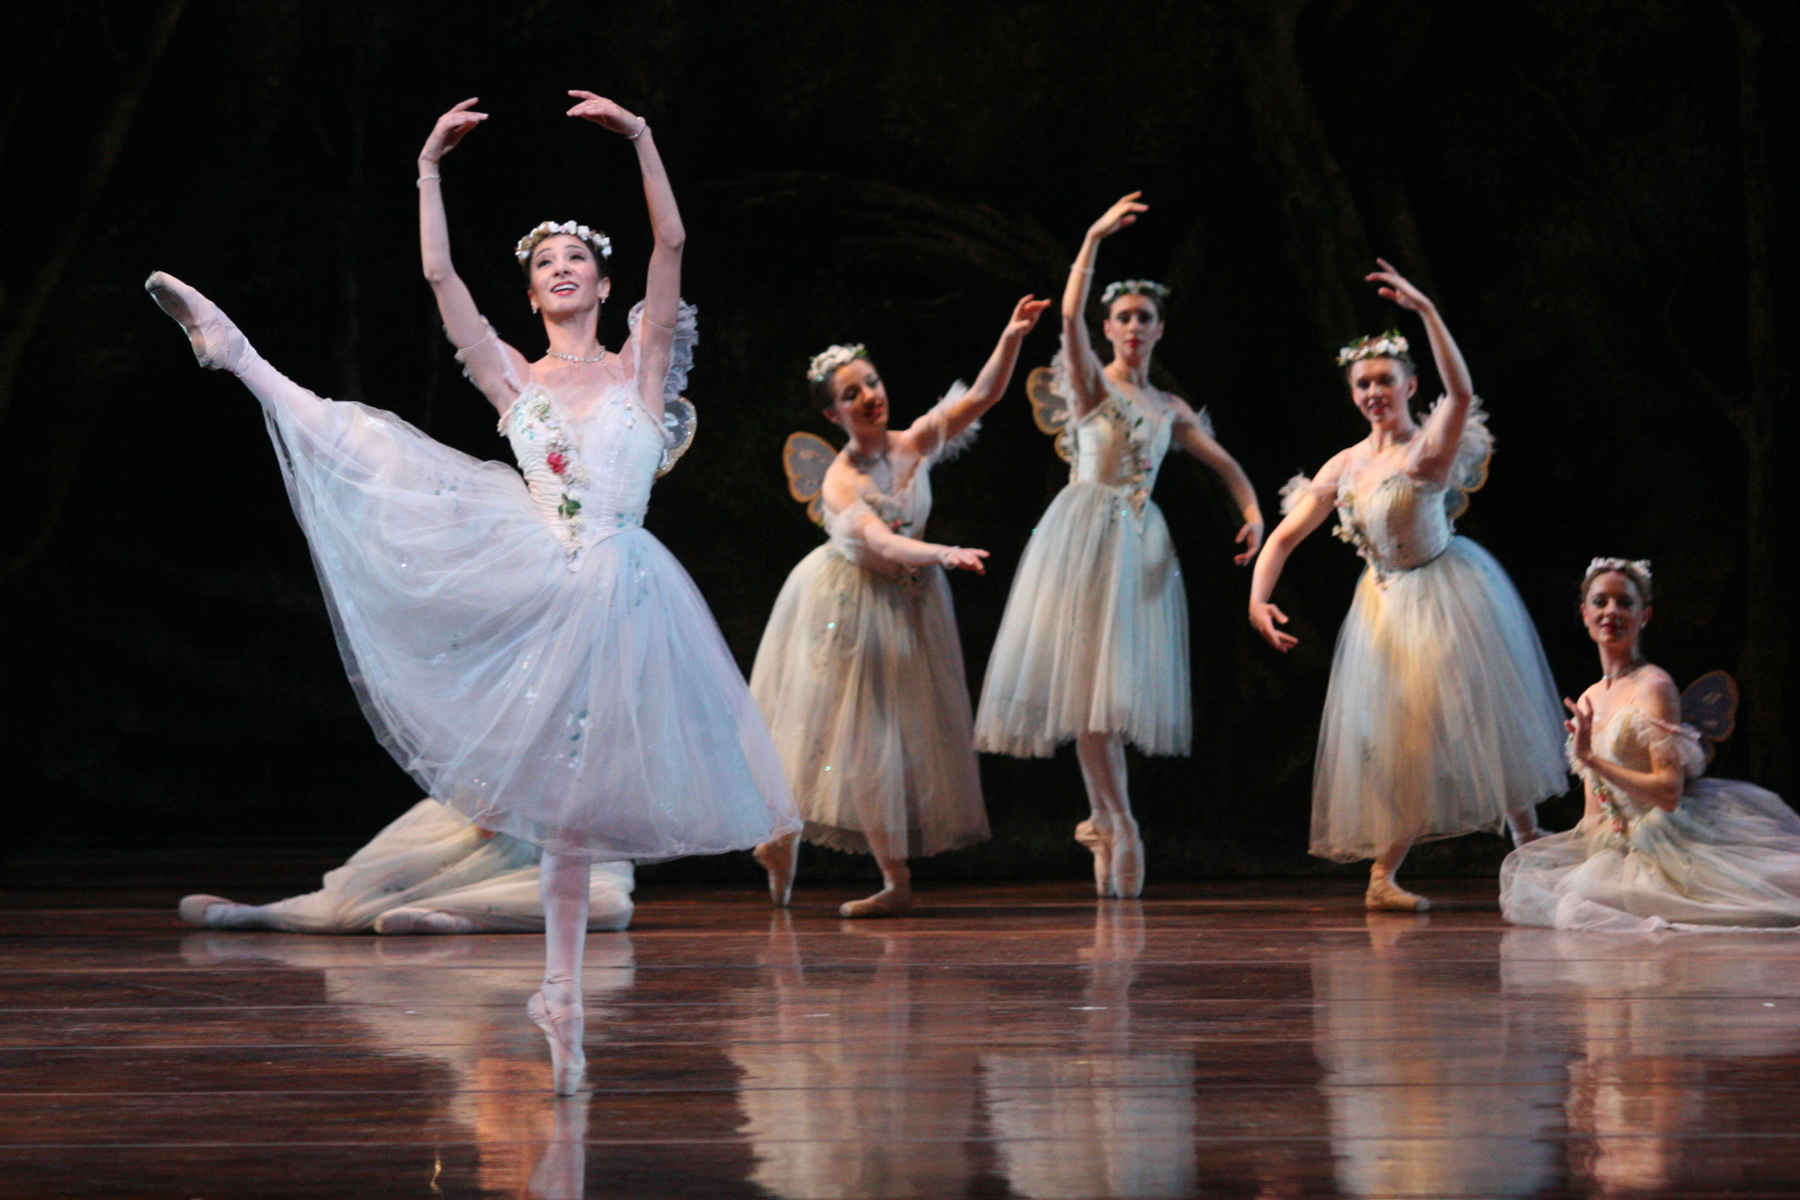 “La Sylphide” Is Charming and Ethereal